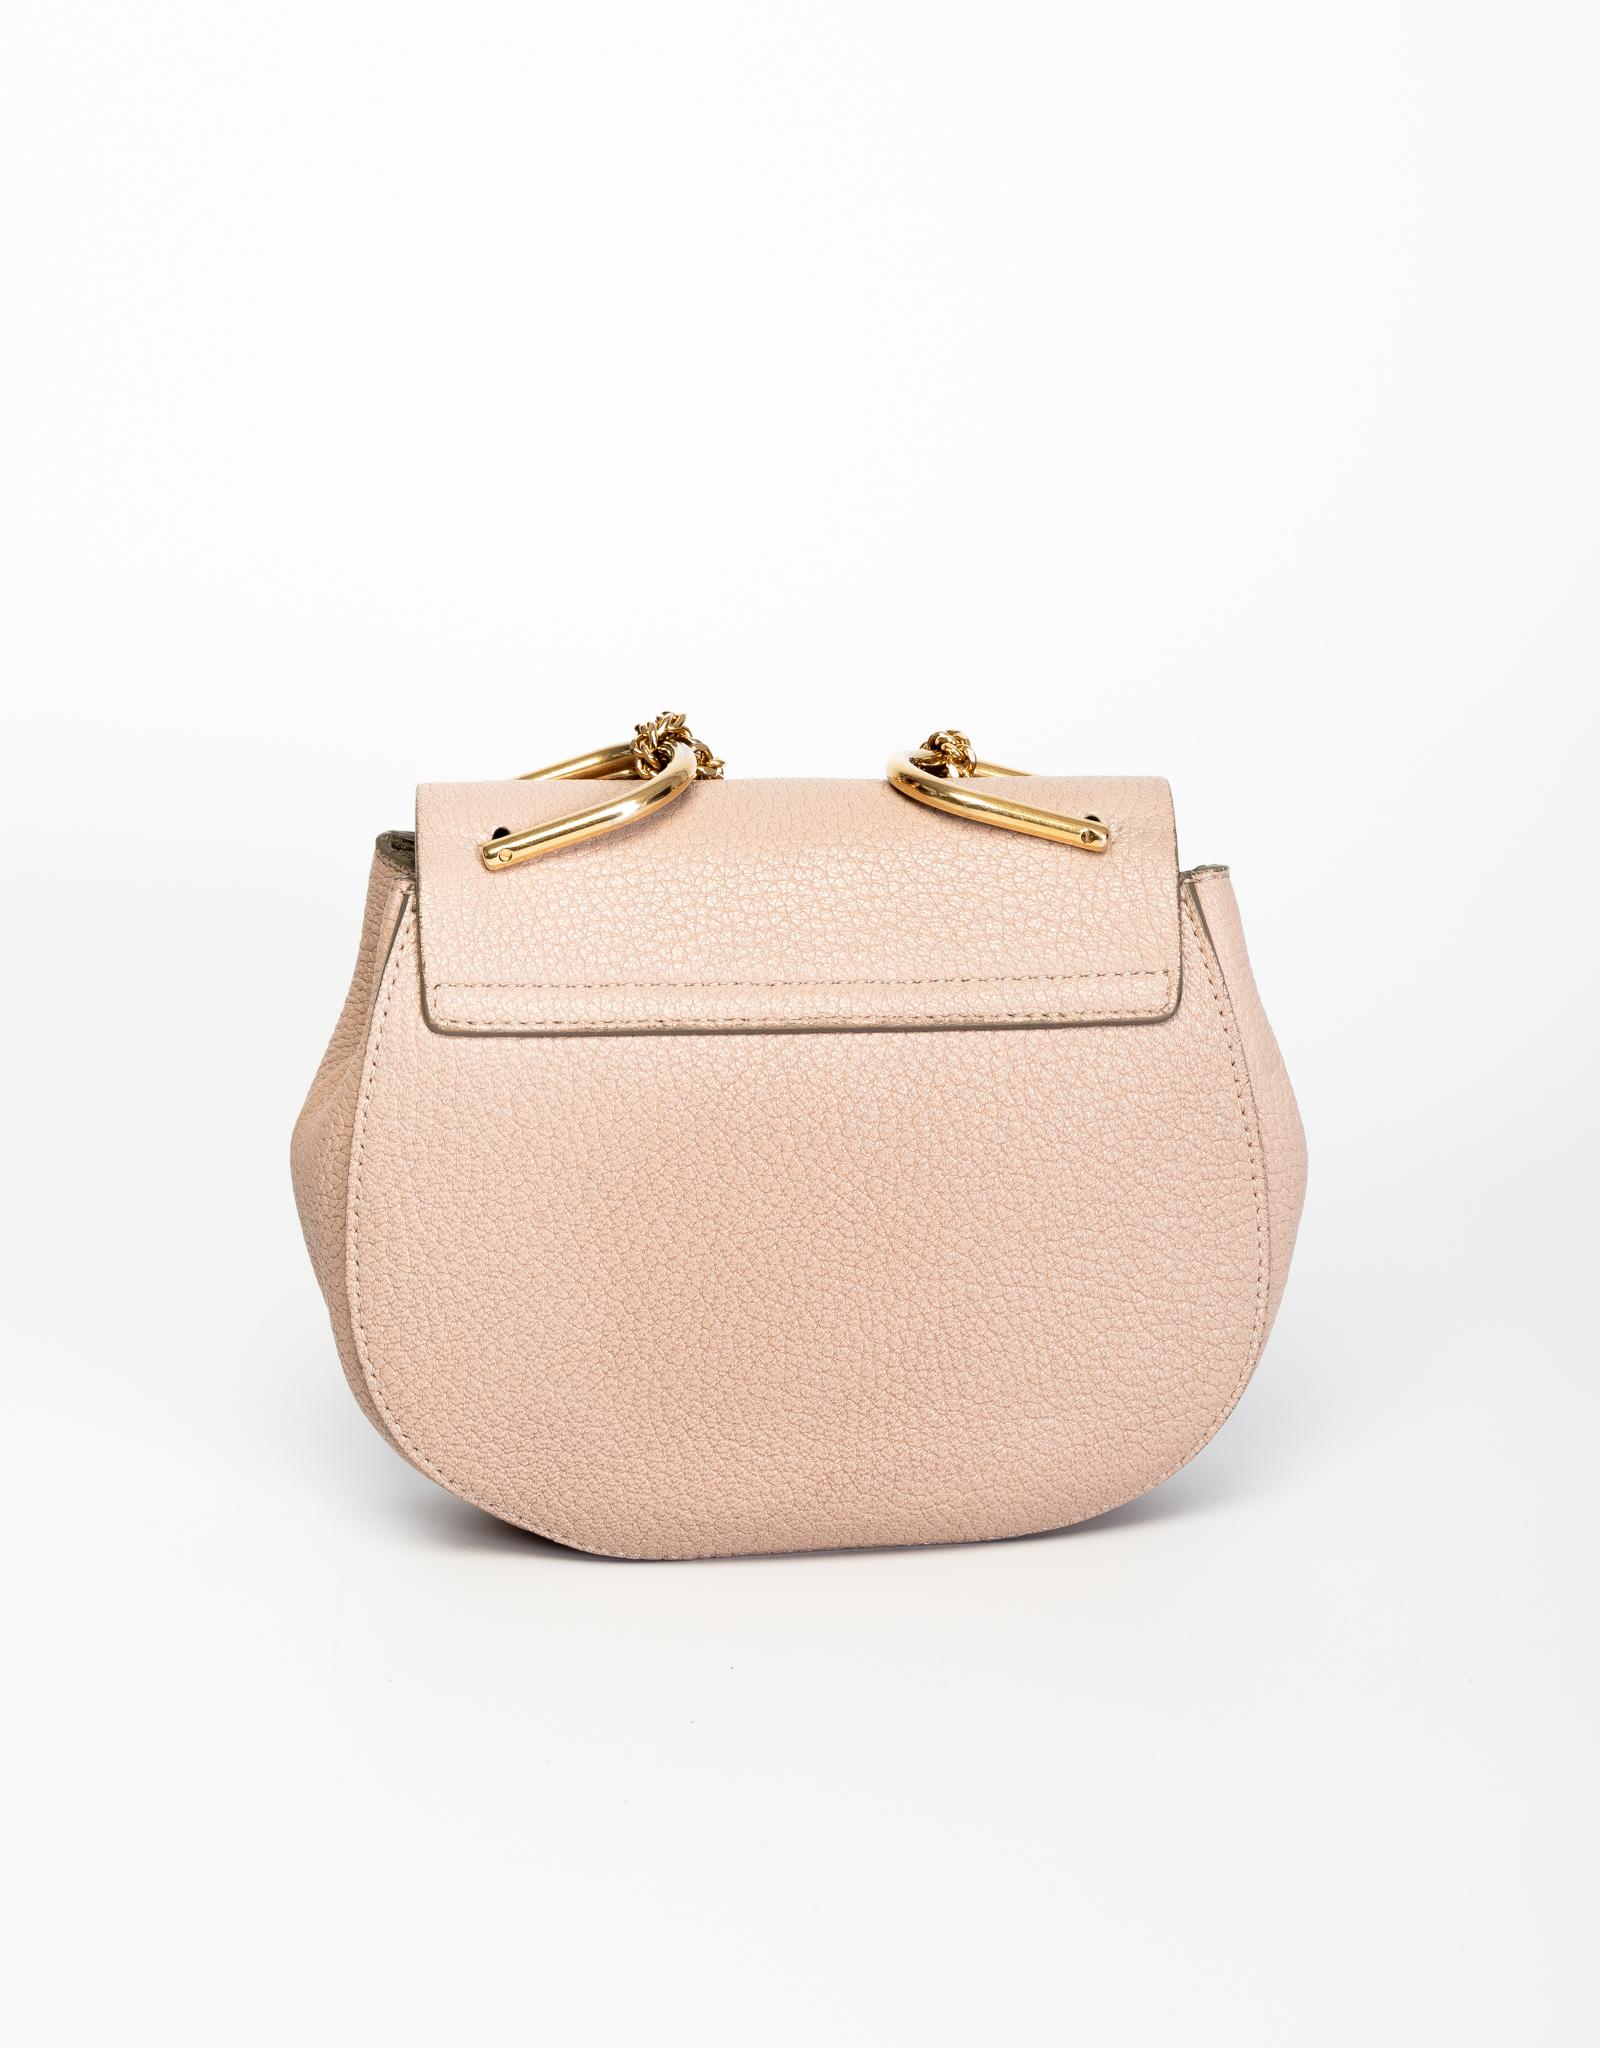 Chloé's iconic drew bag is made of pebbled cement pink leather & features a round body, fold-over top, gold-tone hardware, long elegant chain shoulder strap with a suede lined interior and an internal slip pocket.

COLOR: Cement pink
MATERIAL: Grain